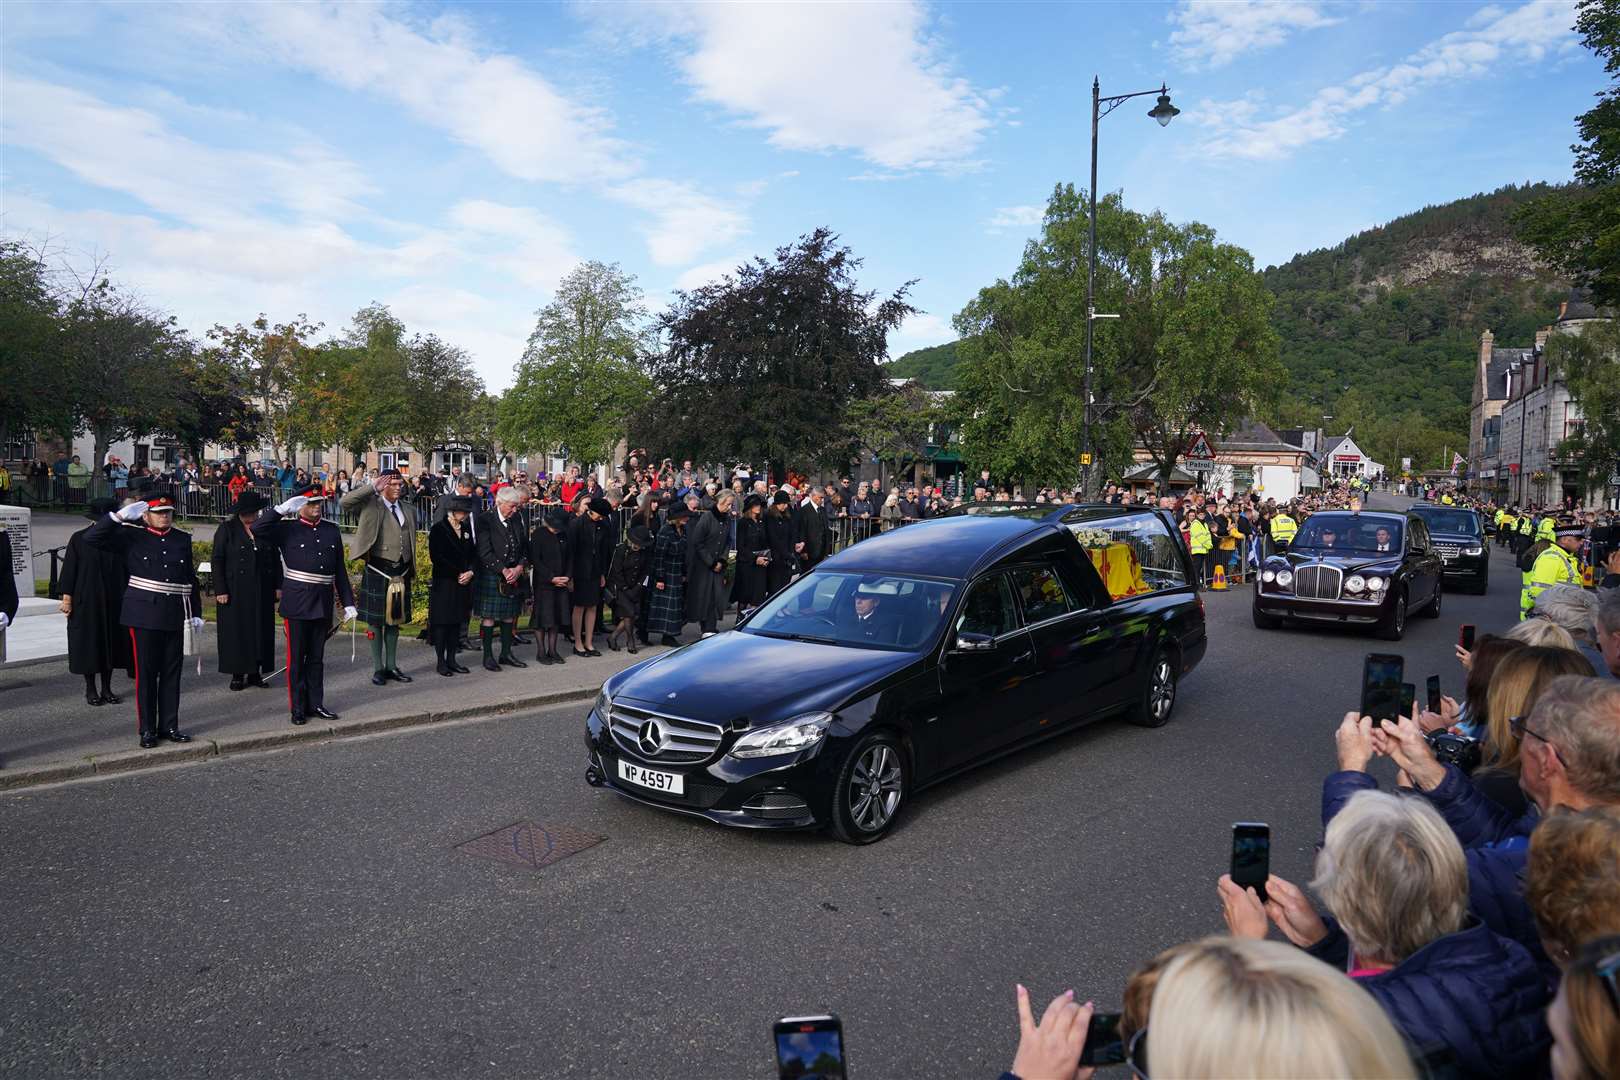 Members of the military salute the hearse carrying the coffin of the Queen in Ballater. Andrew Milligan/PA